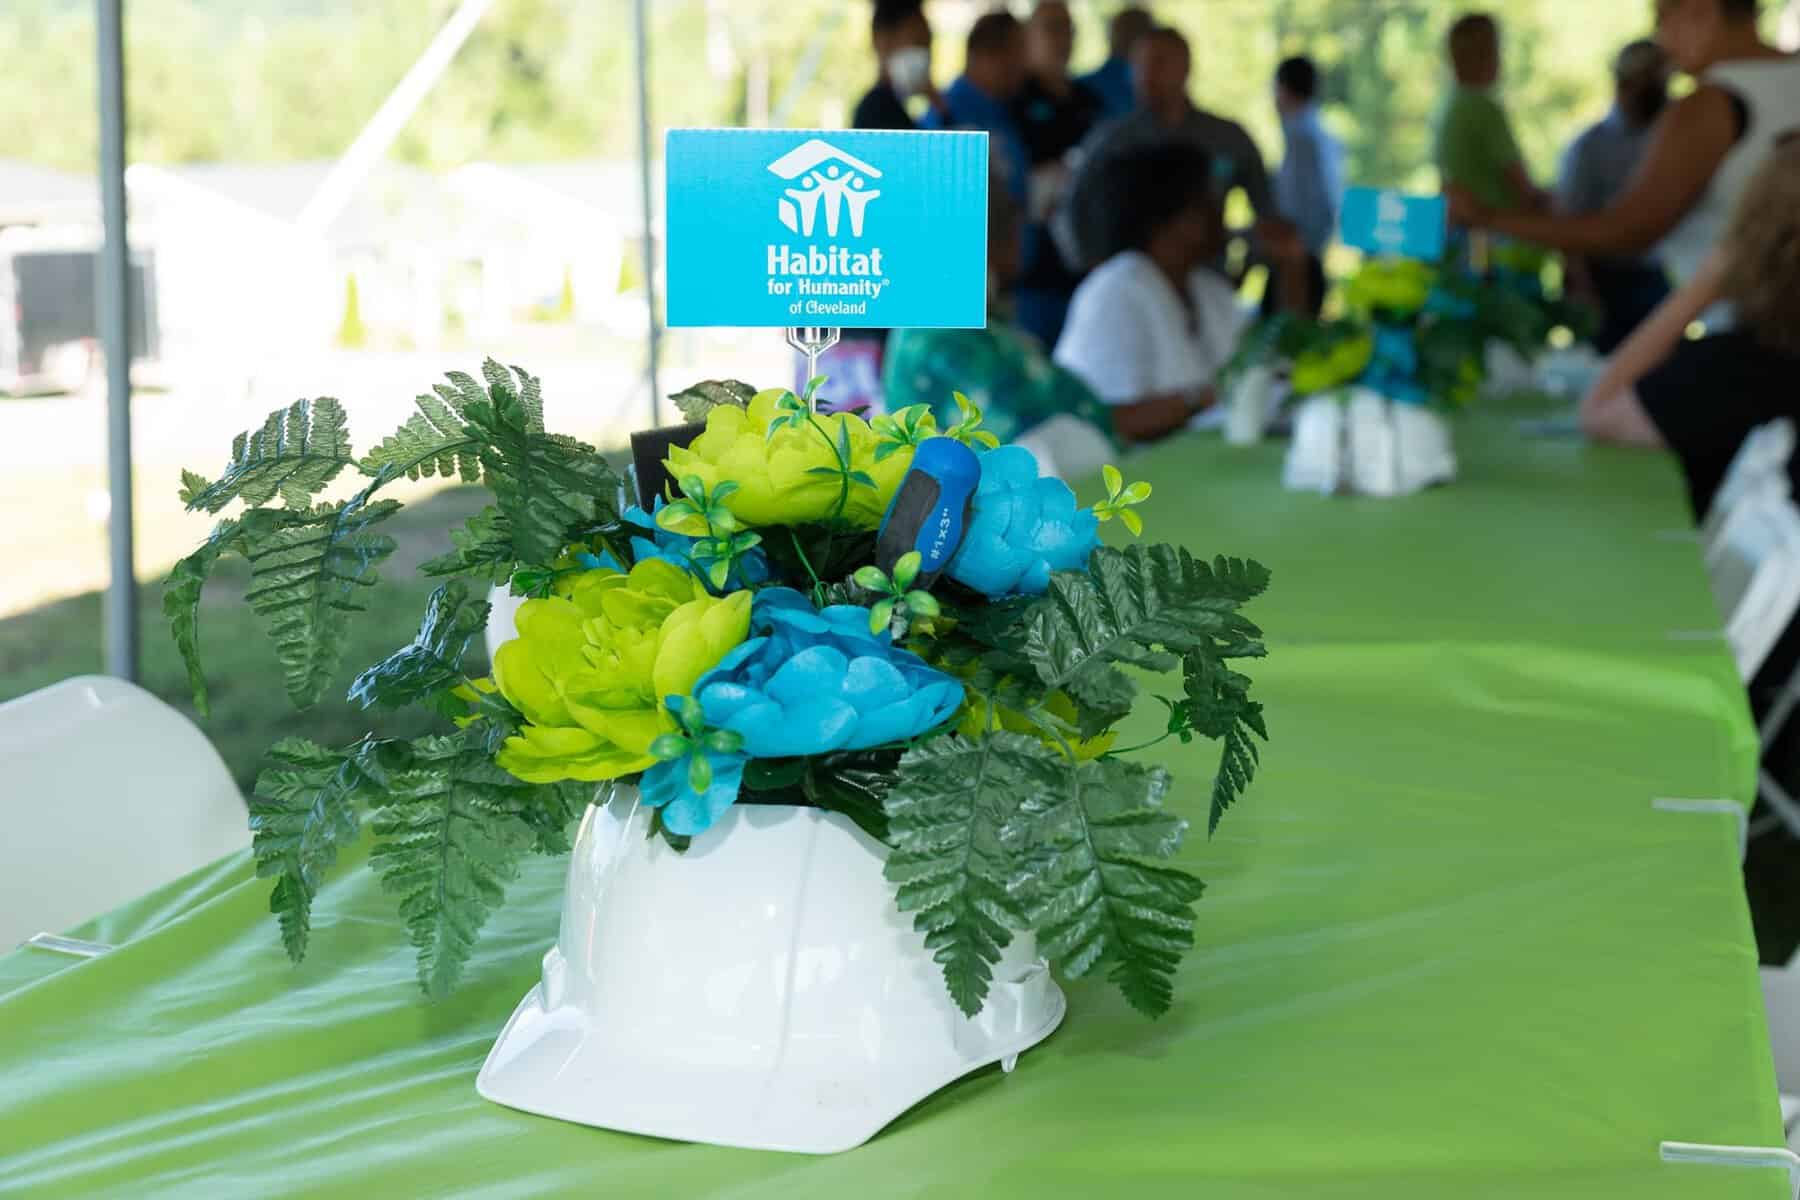 A white hard hat decorated with green and blue silk flowers sits on a table at a Habitat for Humanity affiliate event.